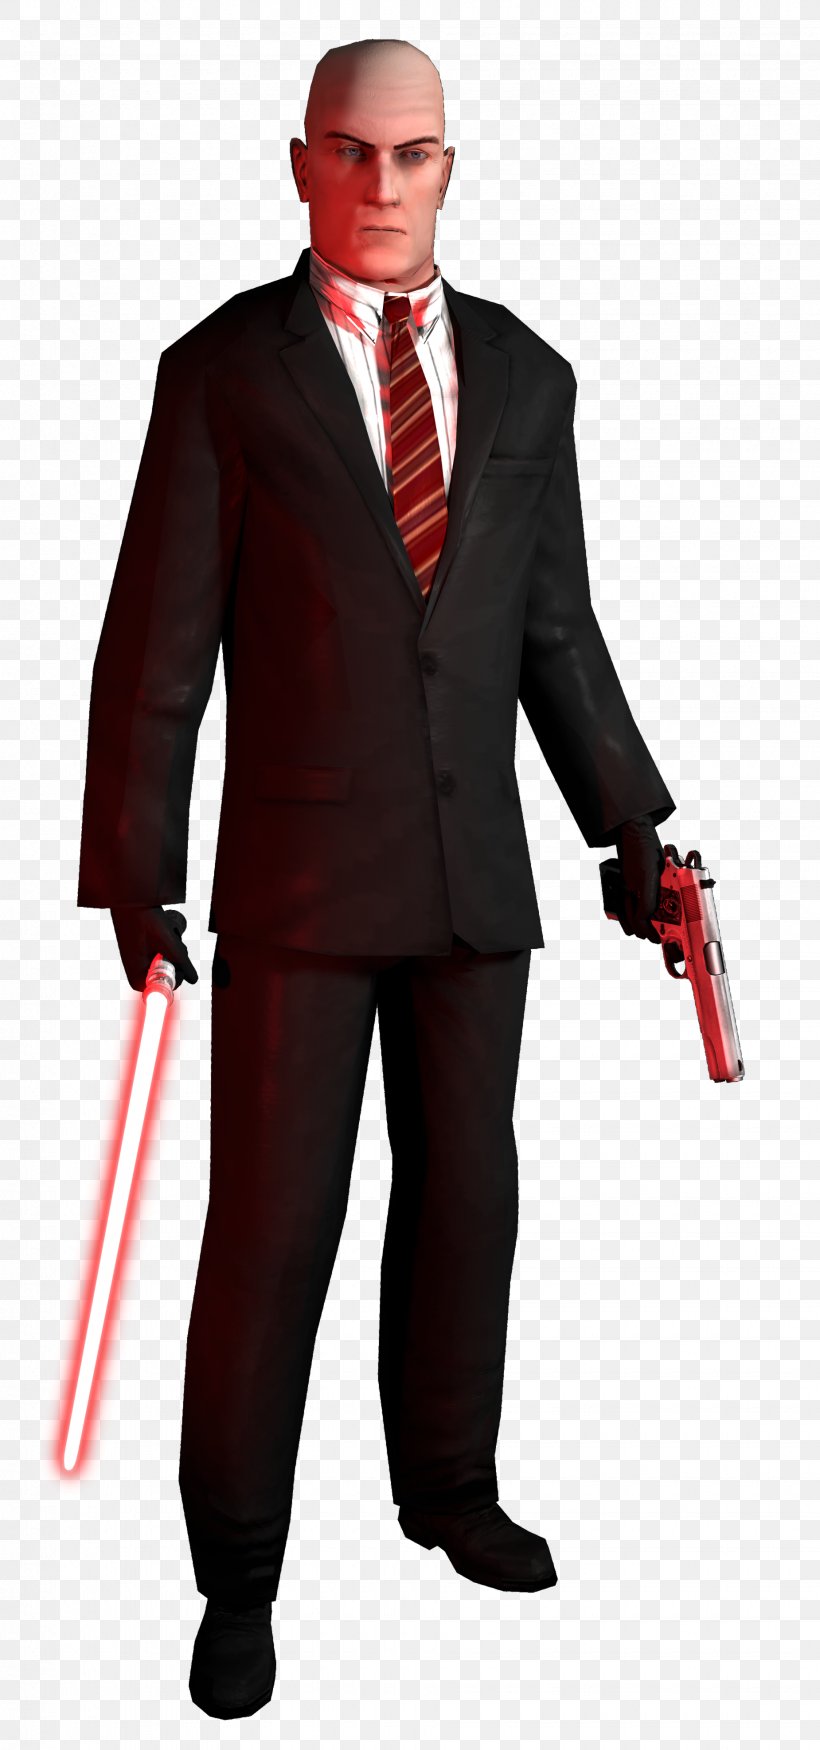 Hitman: Codename 47 Hitman: Agent 47 Hitman: Absolution Image, PNG, 1850x3950px, Hitman Codename 47, Agent 47, Businessperson, Costume, Formal Wear Download Free